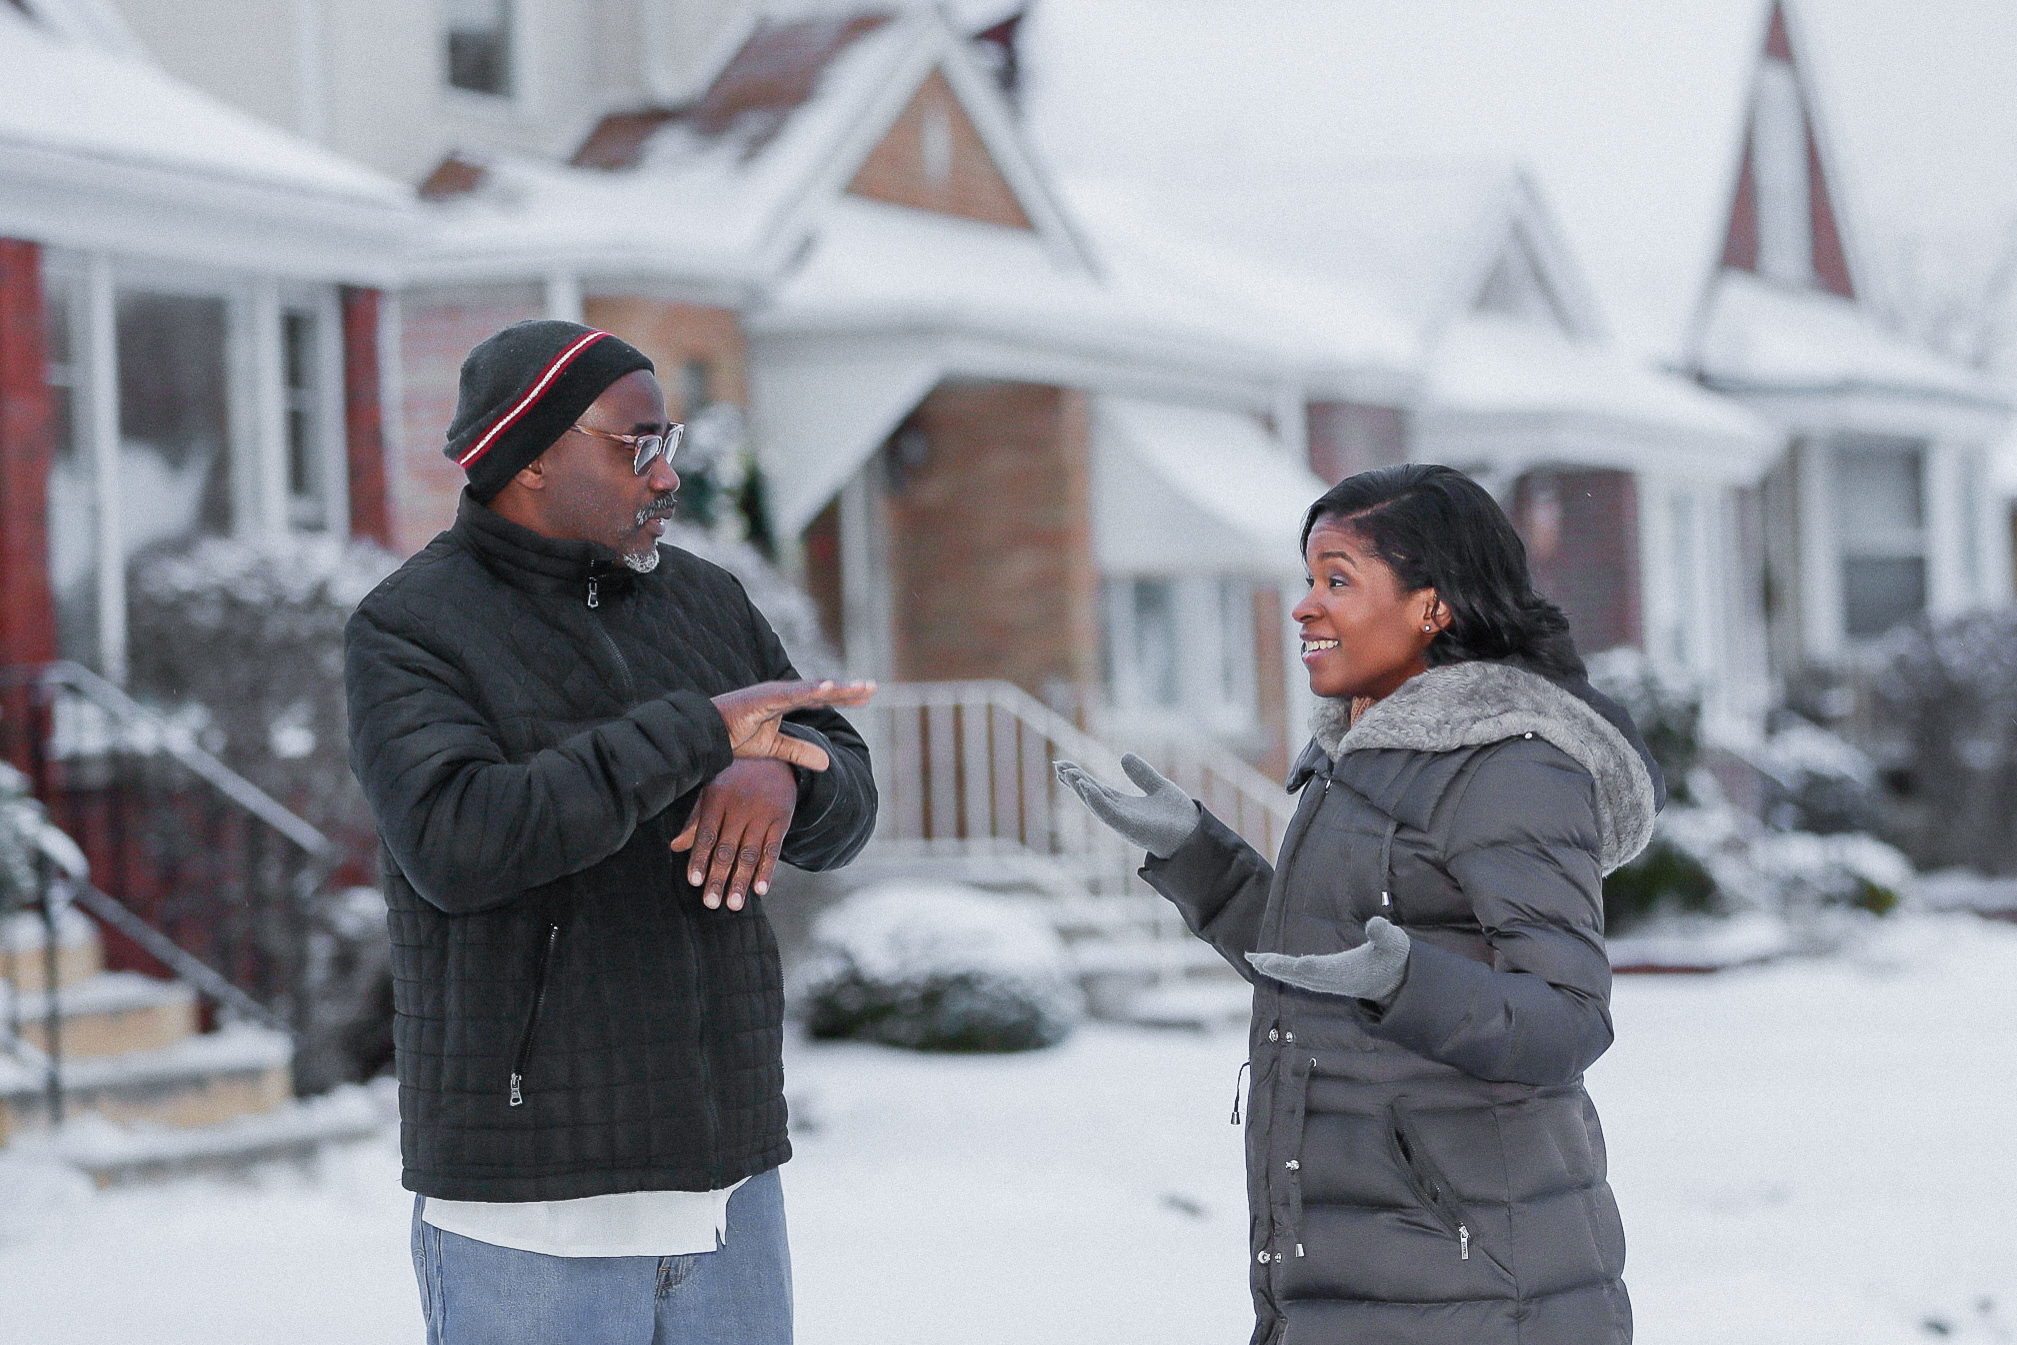 Royce Martin and Heather Dowdy having a conversation while standing in the snow outside their family home in Chicago.